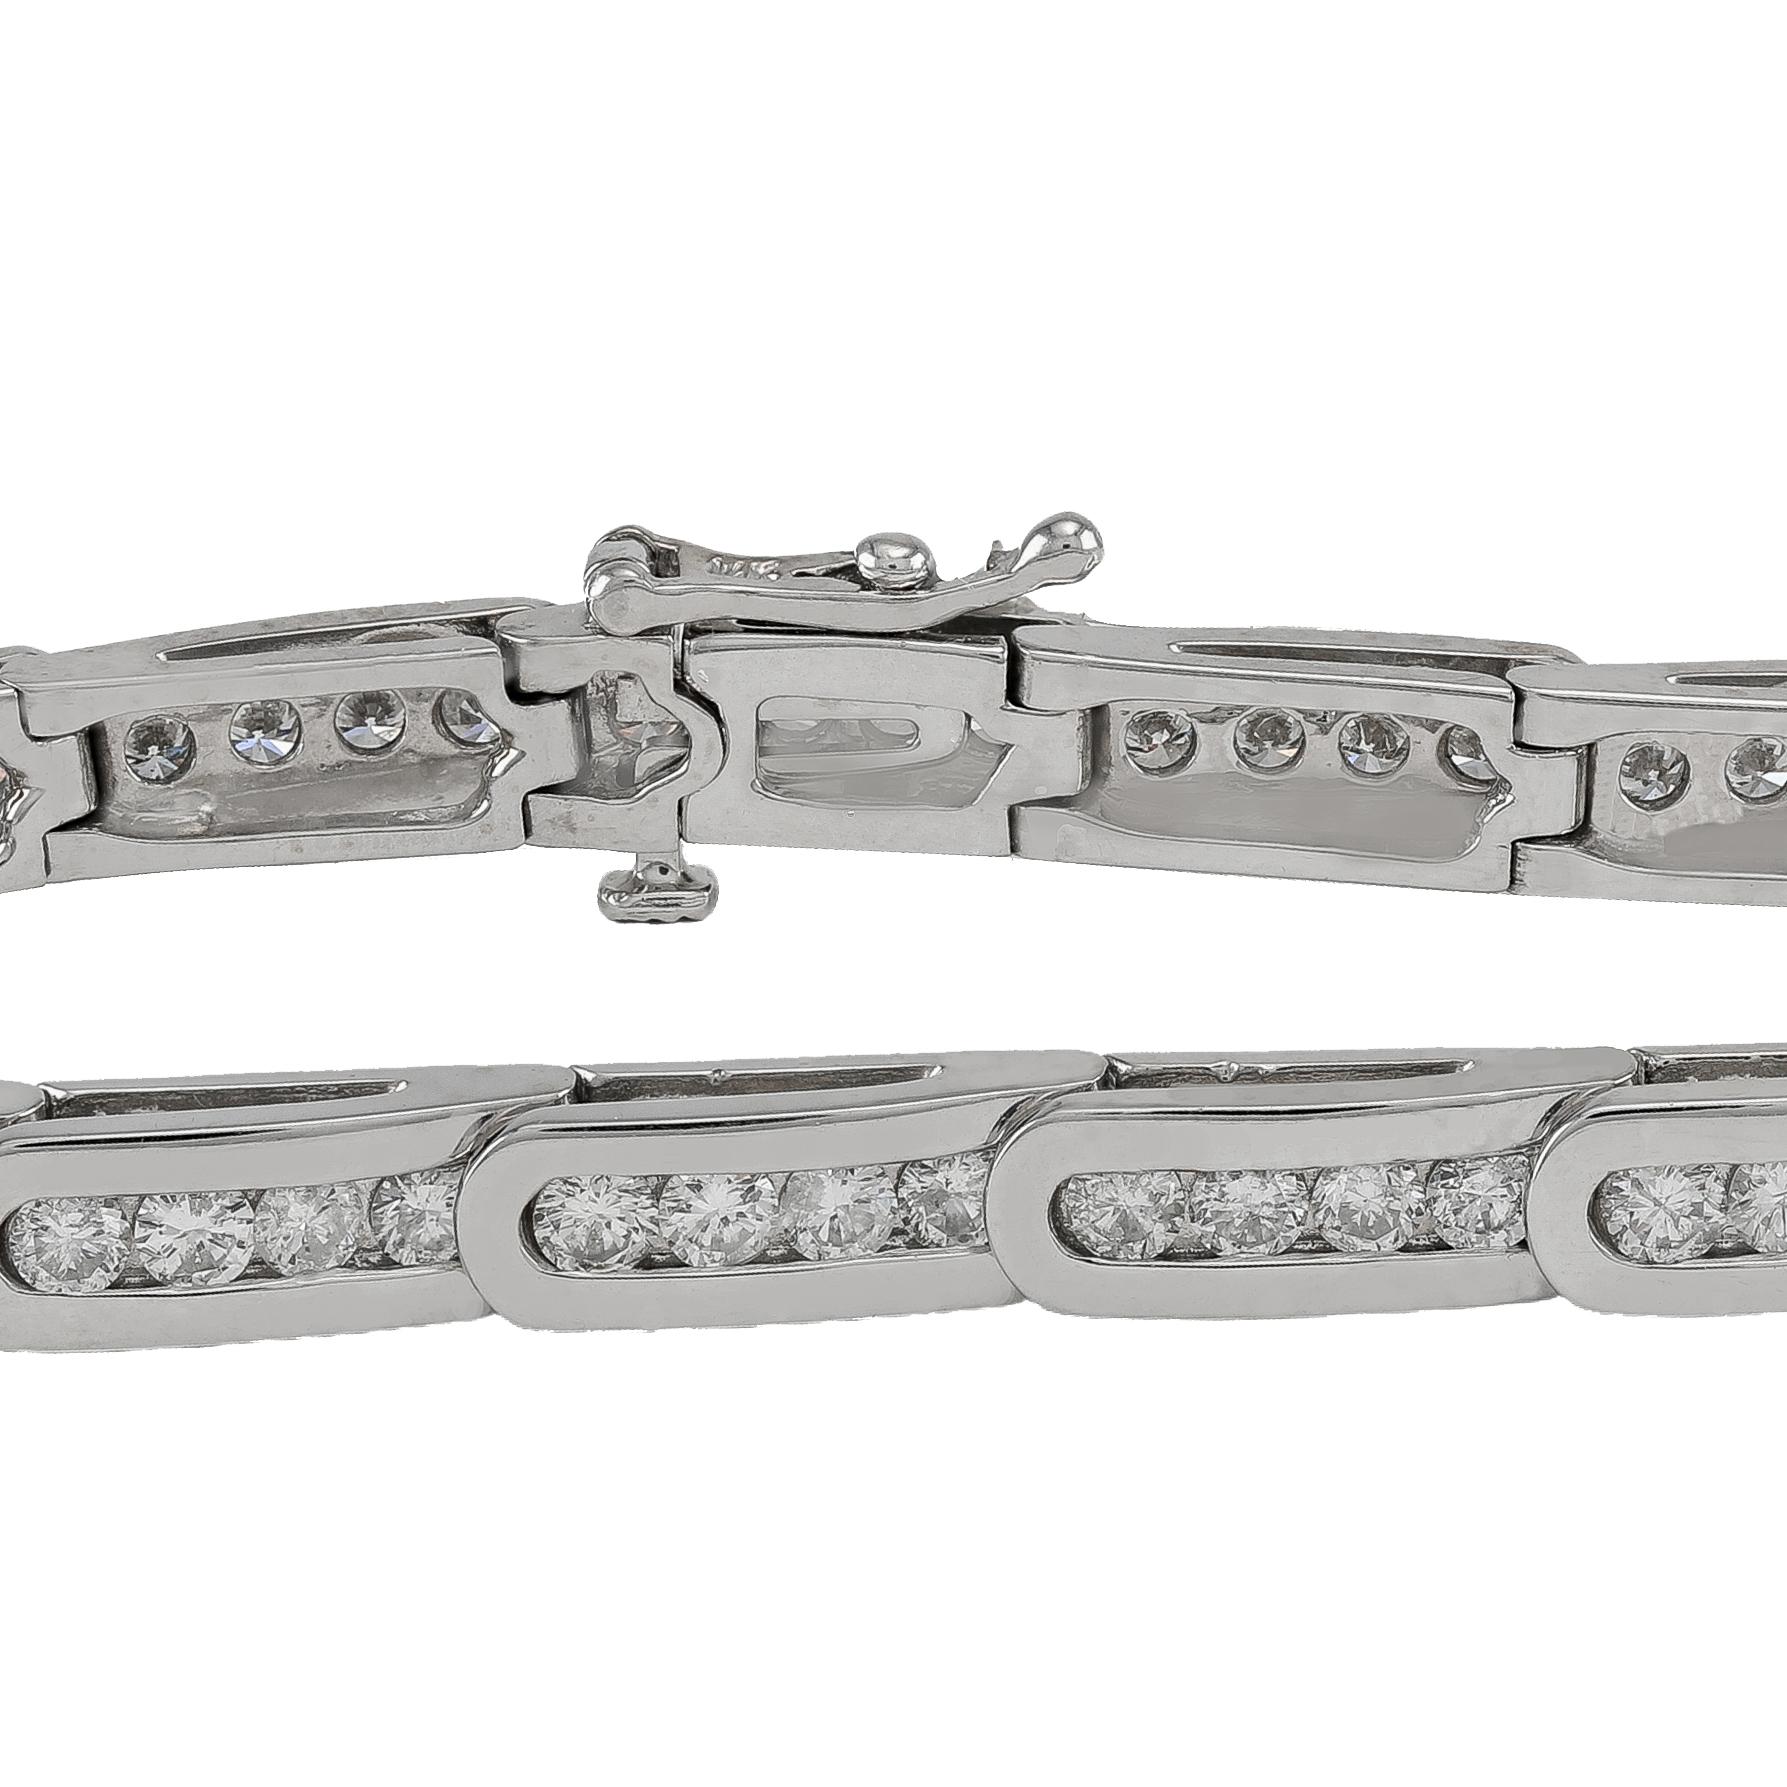 White Gold 5.0 Carat Diamond Designed Tennis Bracelet
High quality diamond tennis bracelet. An elegant yet simple design that shows only the large diamonds. Made from 14k white gold this bracelet is high polish similar to a mirror. The diamonds are